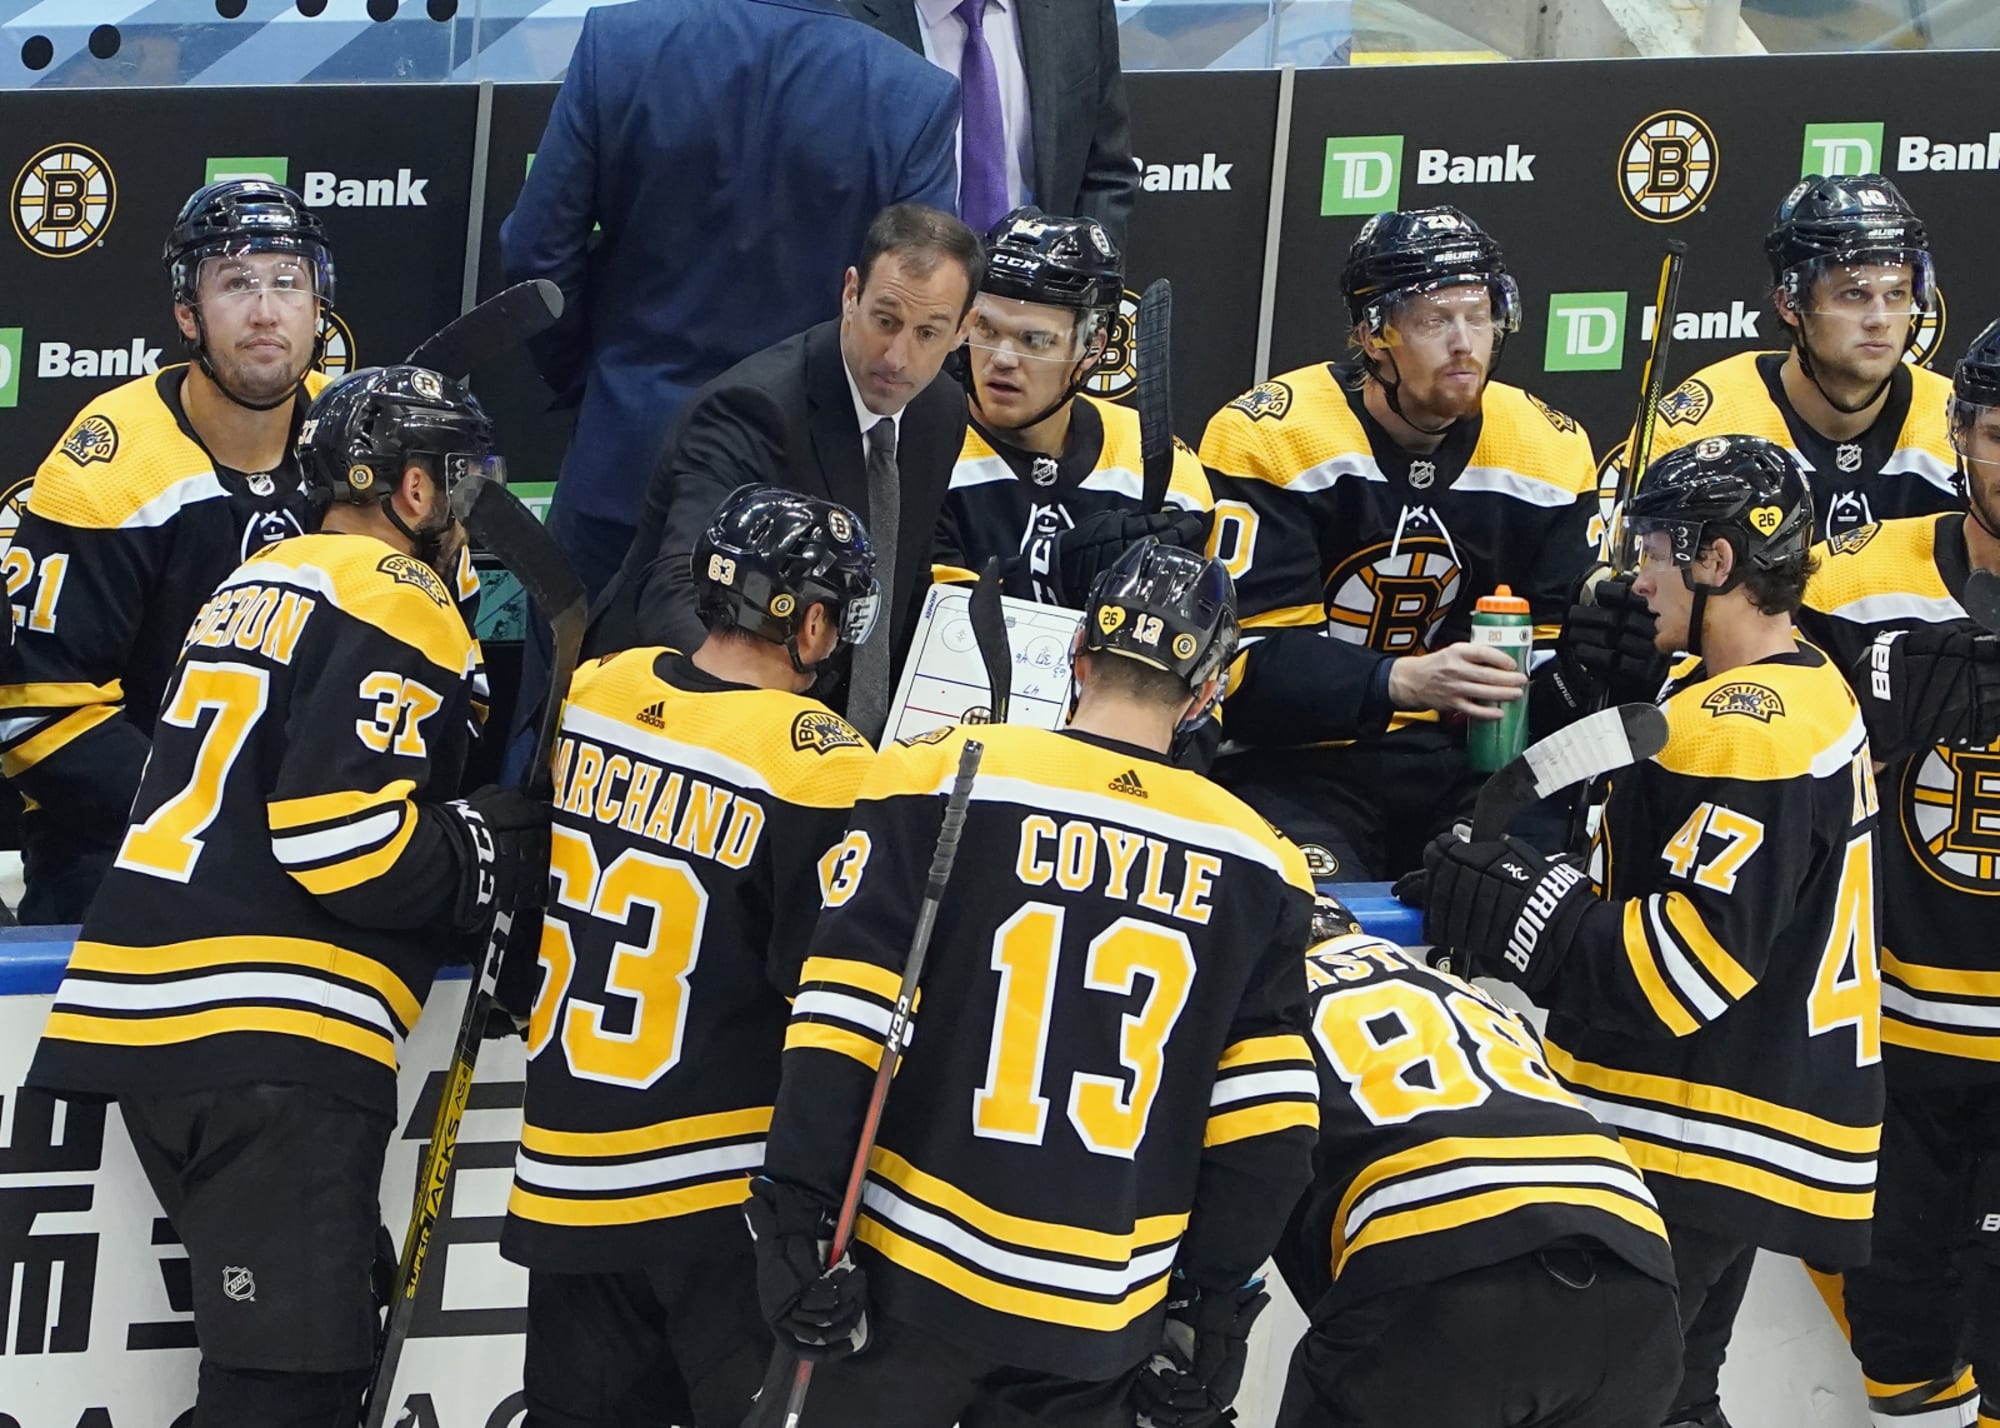 Boston Bruins are losing this assistant coach to BU